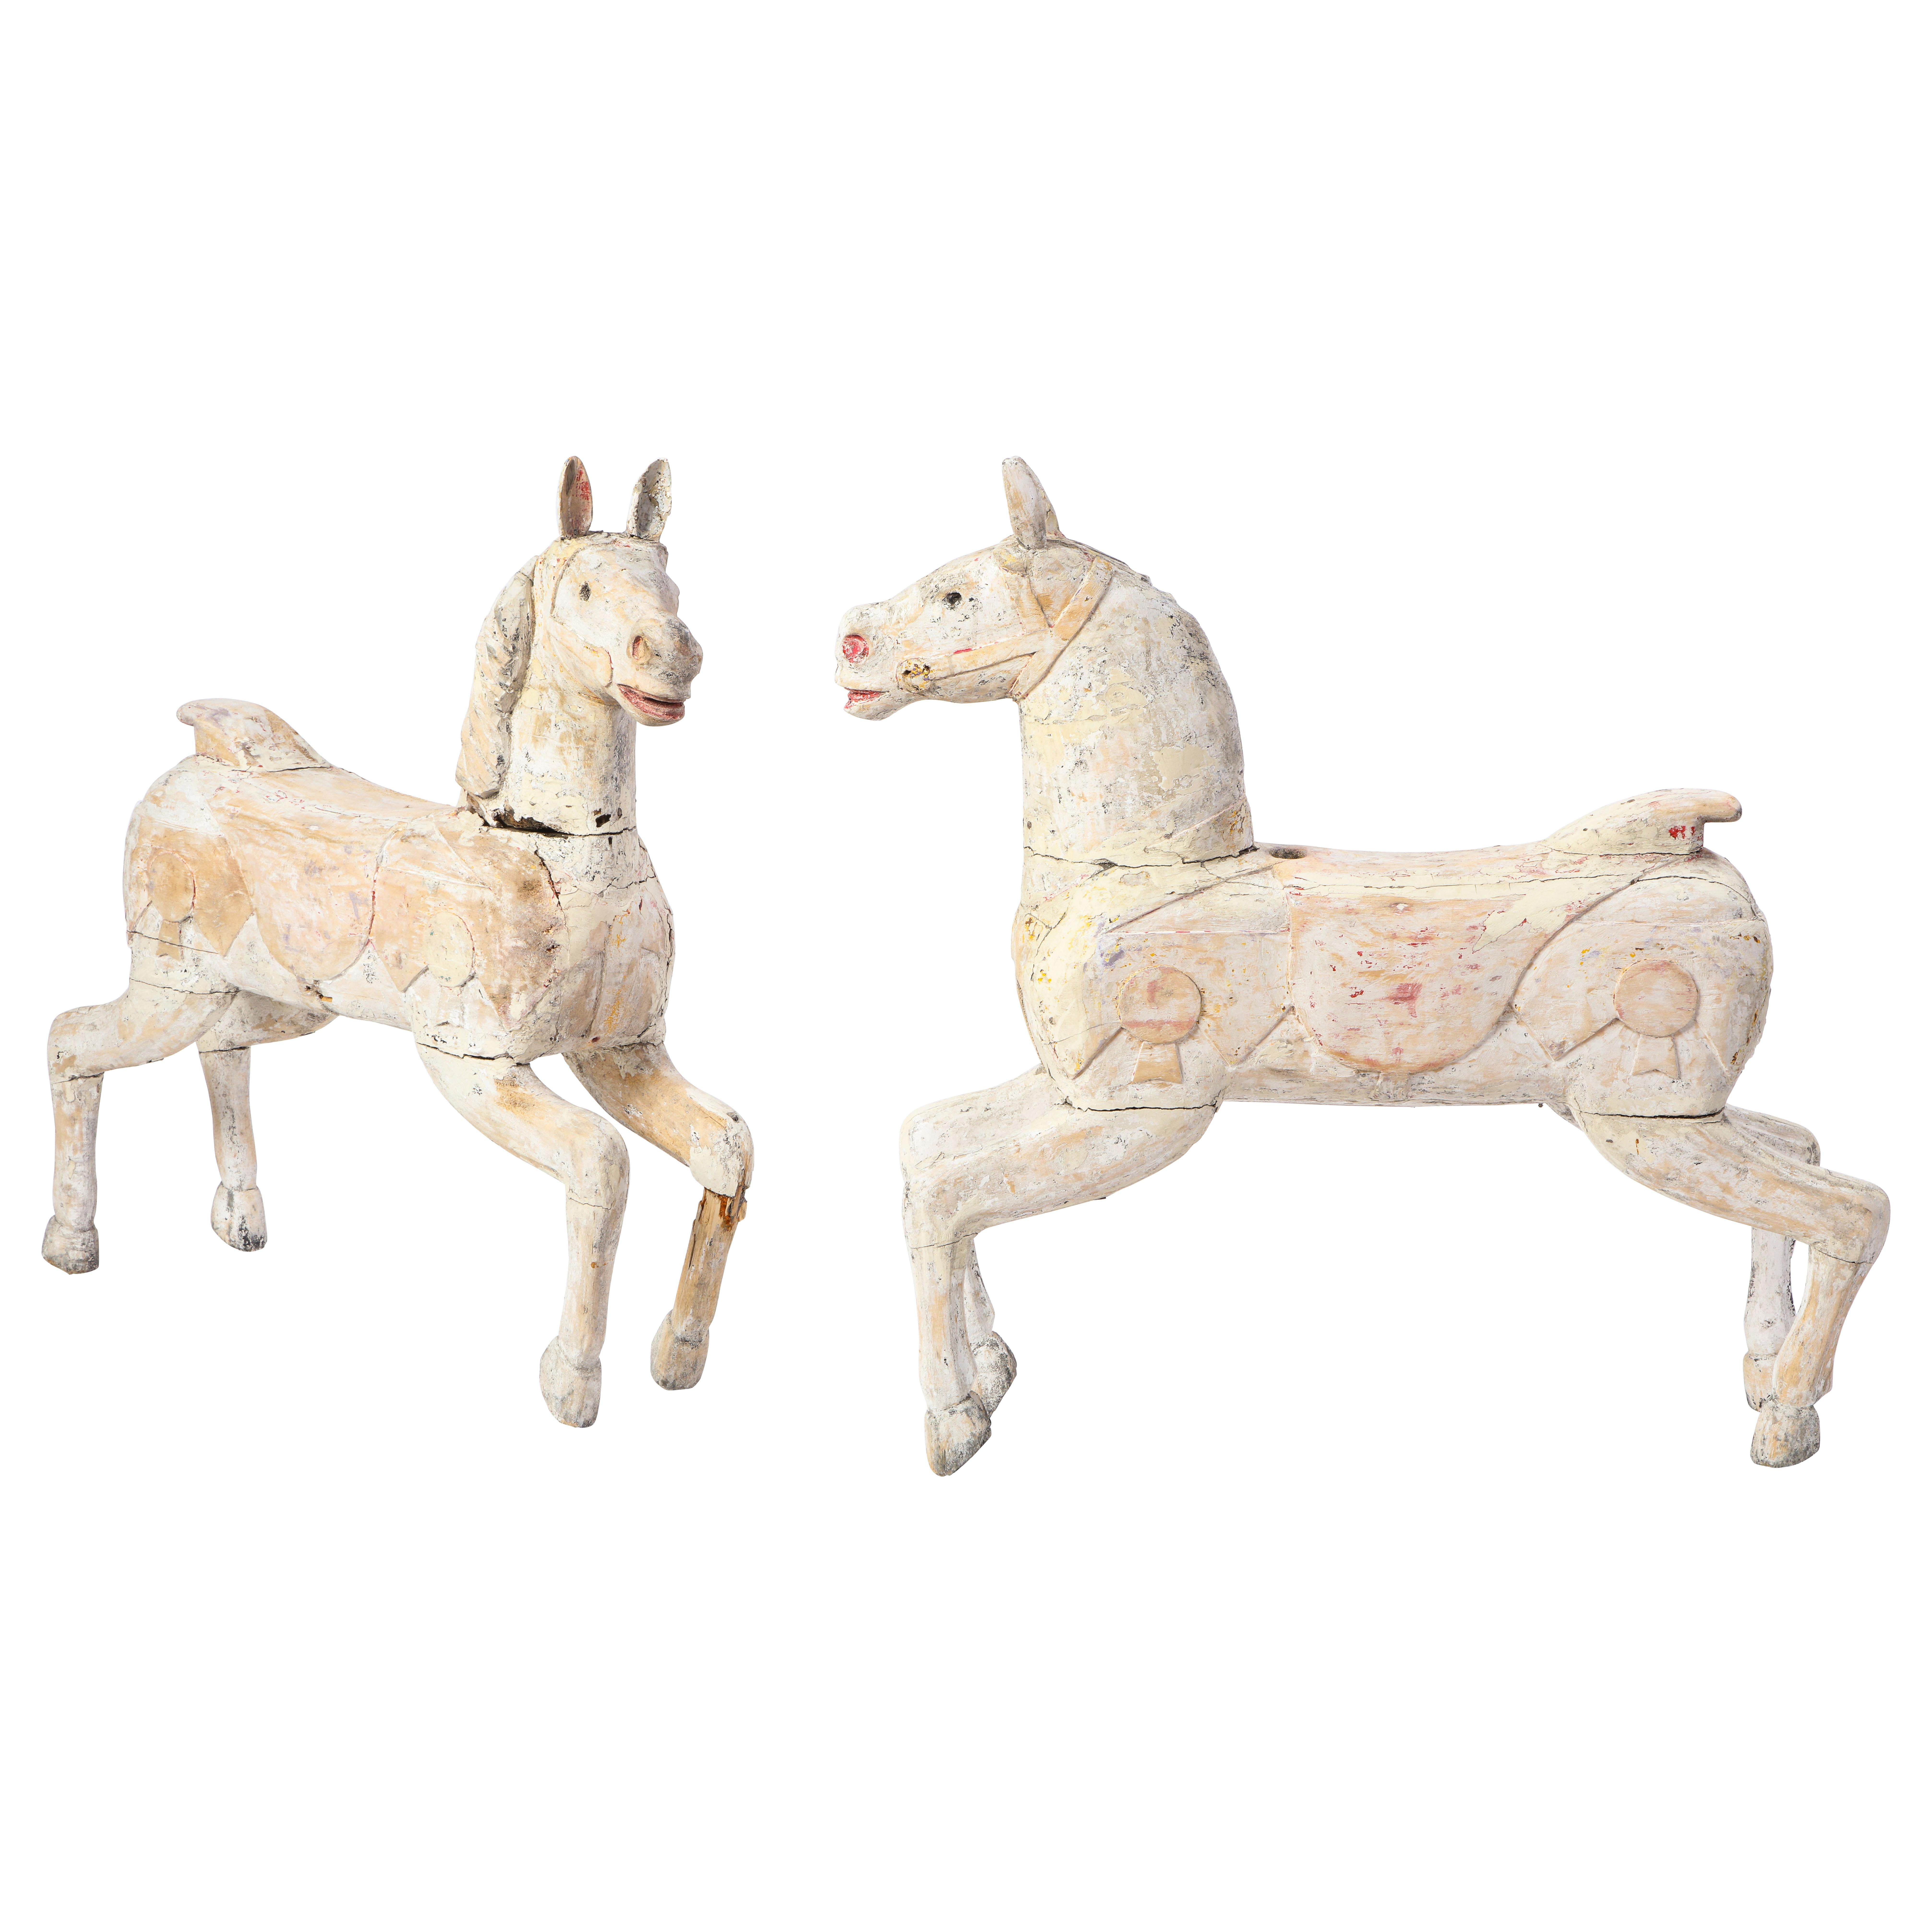 Pair of Small White-Painted Carousel Horses, 20th Century